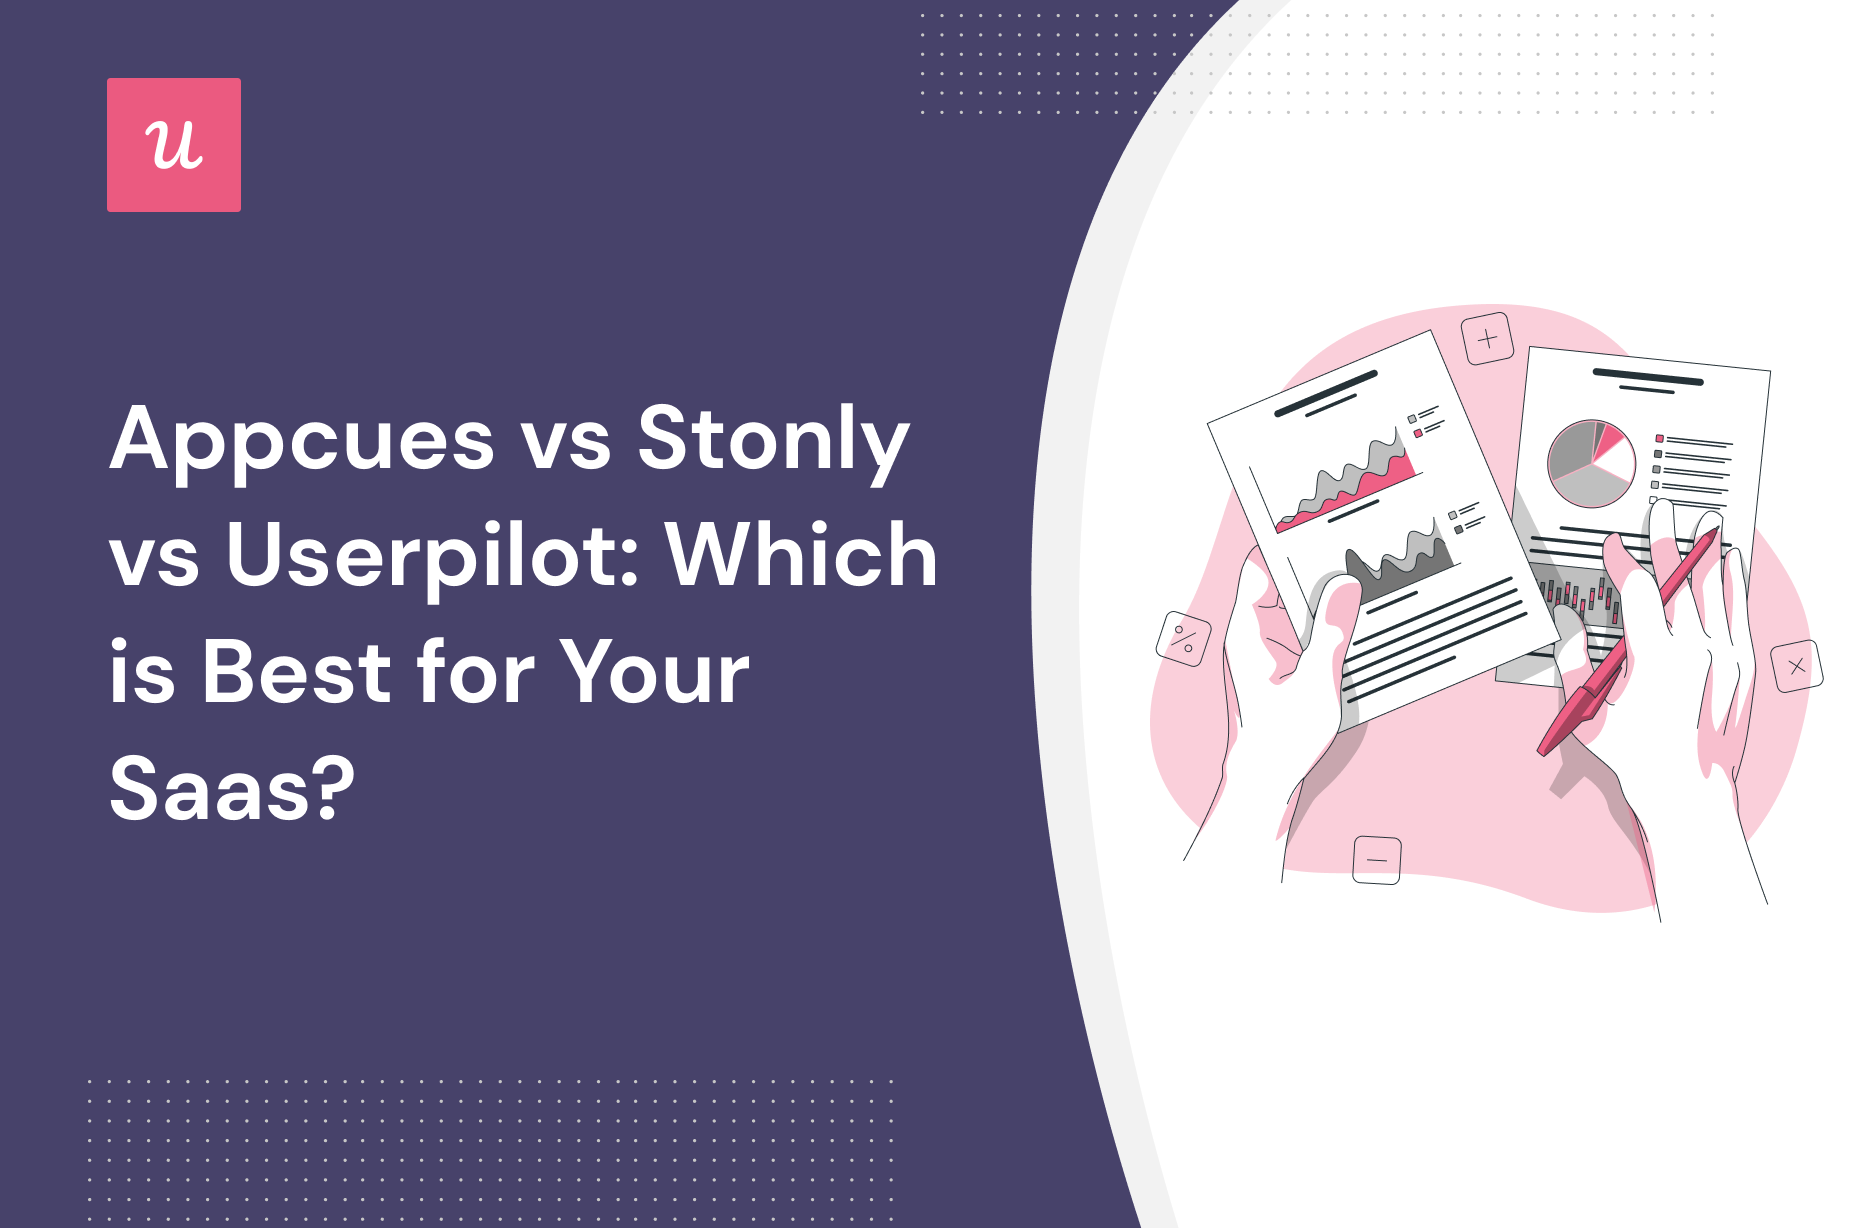 Appcues vs Stonly vs Userpilot: Which is Best for Your Saas?